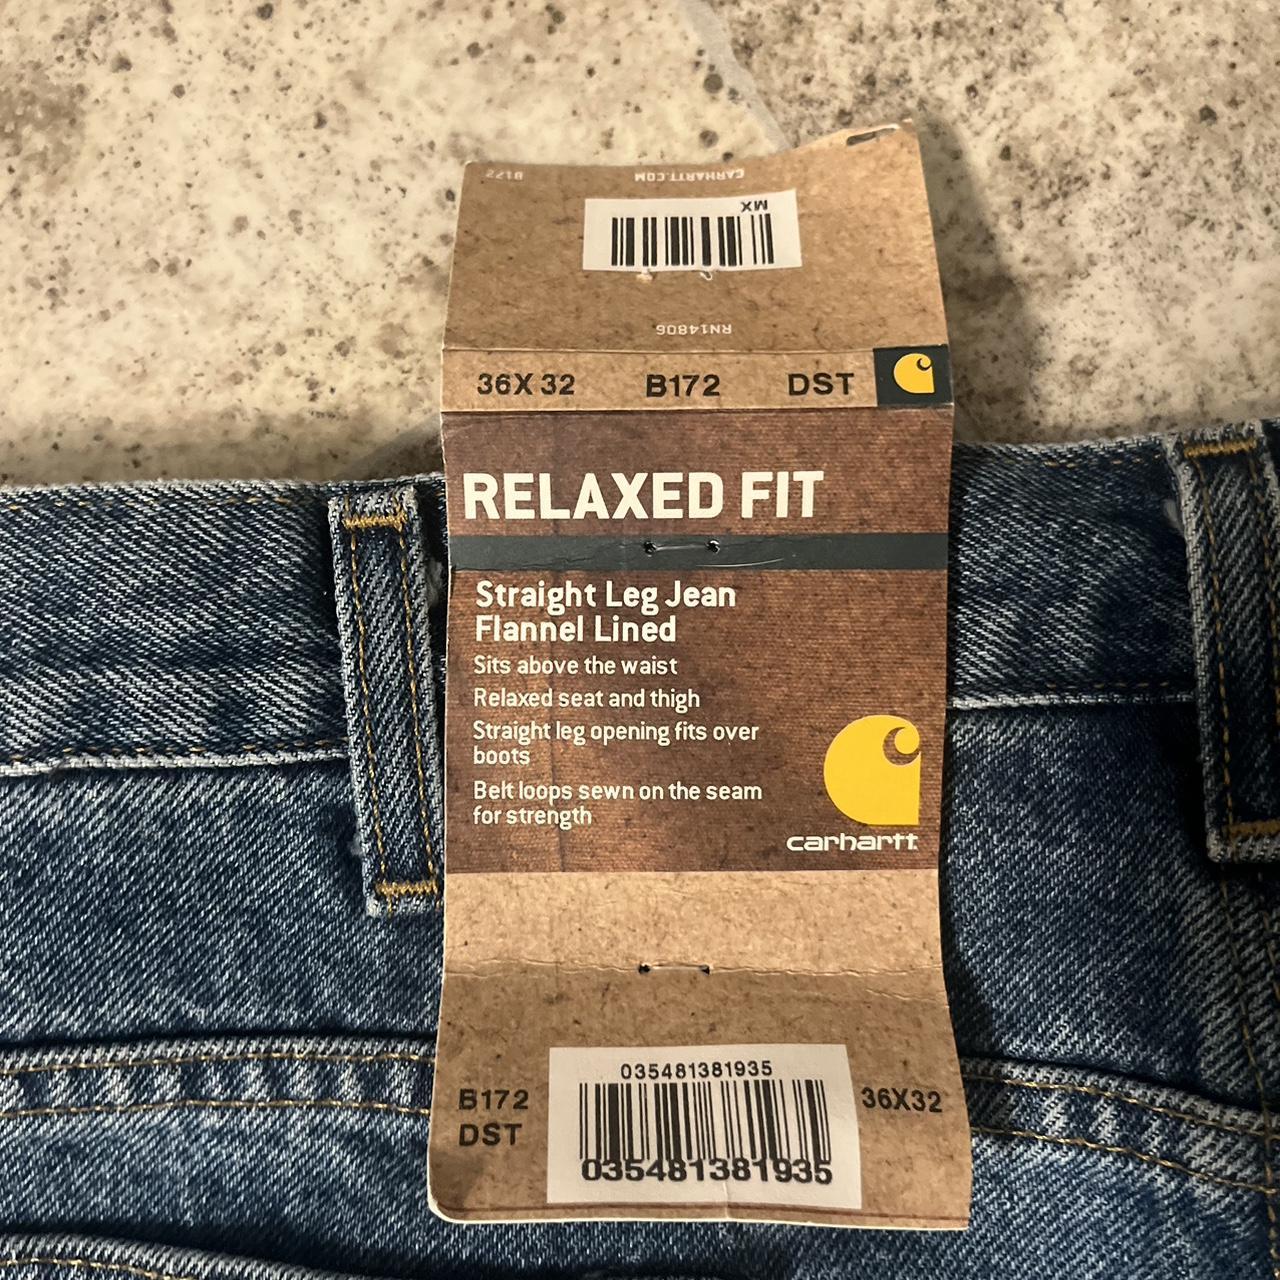 Carhartt B172DST Relaxed Fit Jean - Straight Leg / Flannel Lined